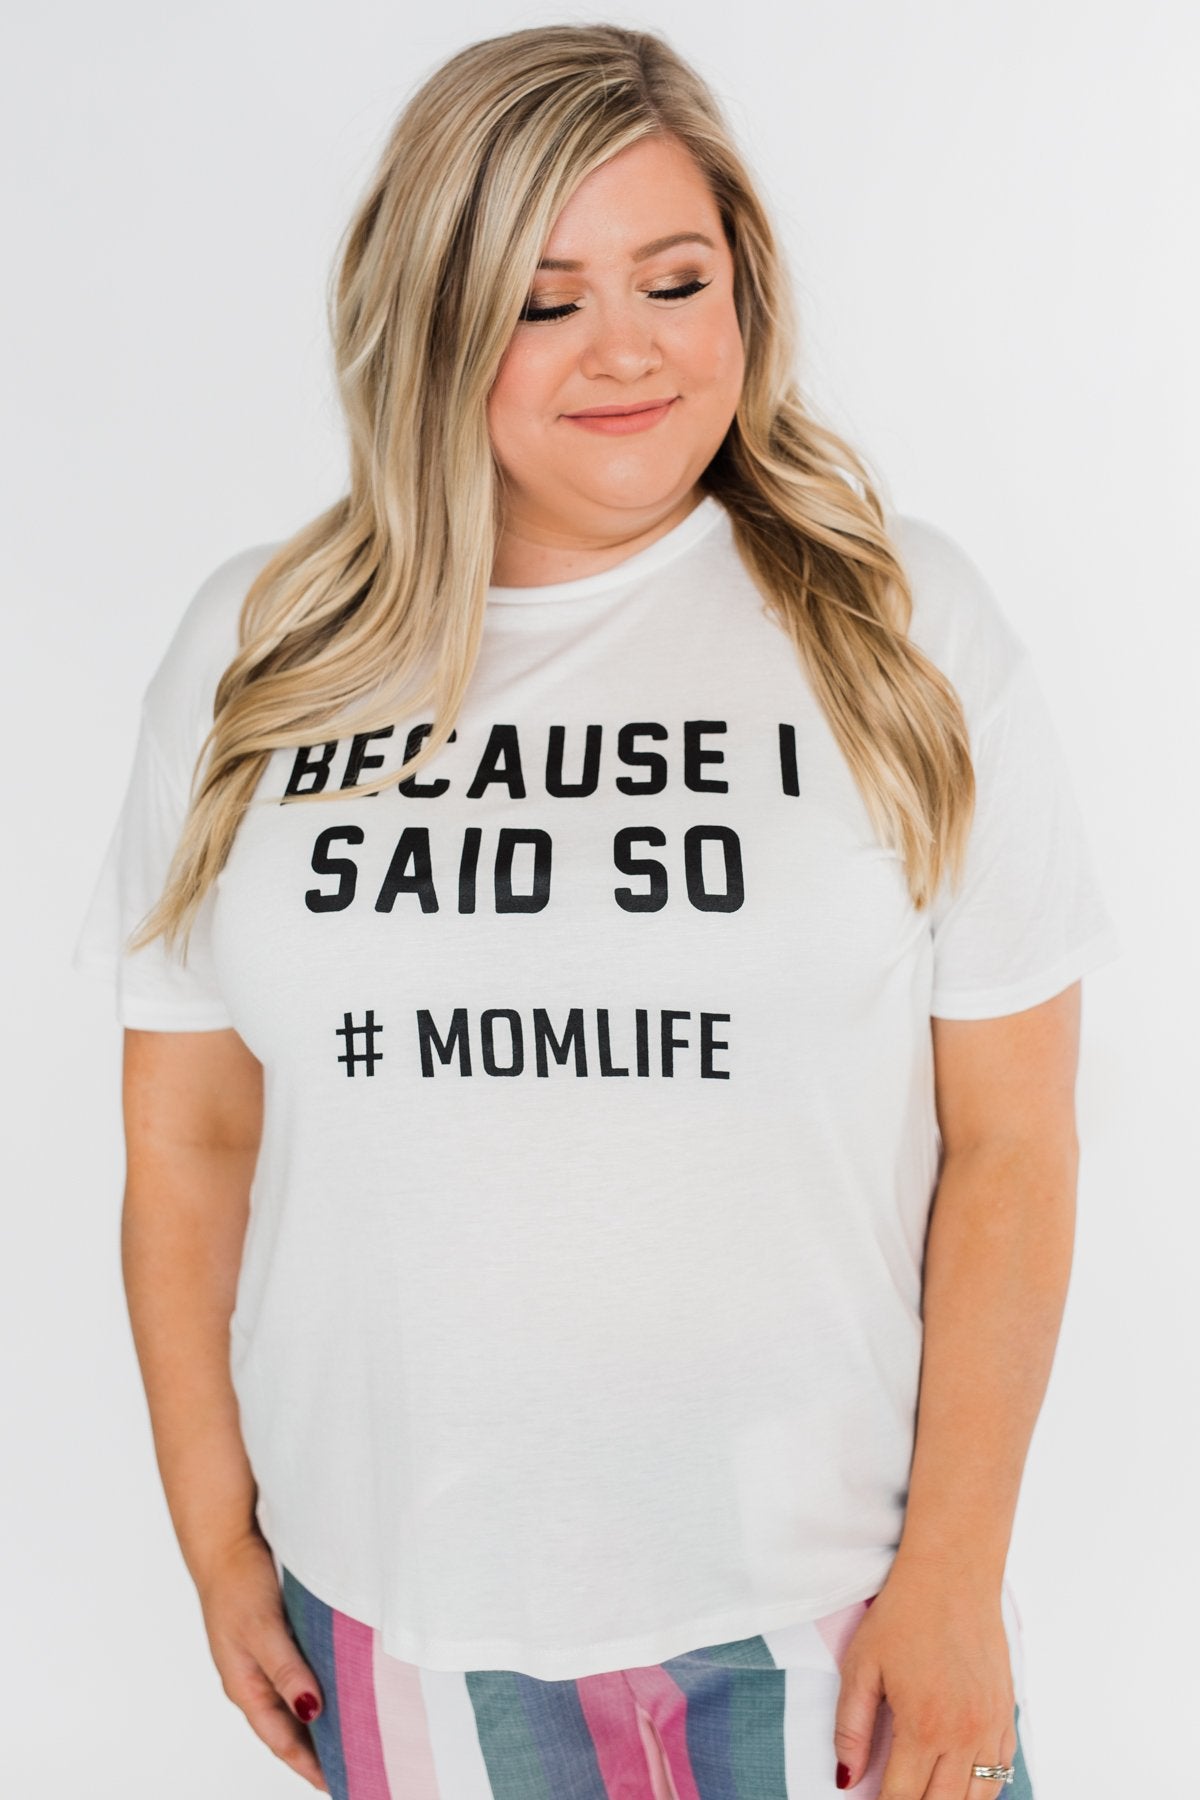 "Because I Said So" Graphic Short Sleeve Top- Ivory